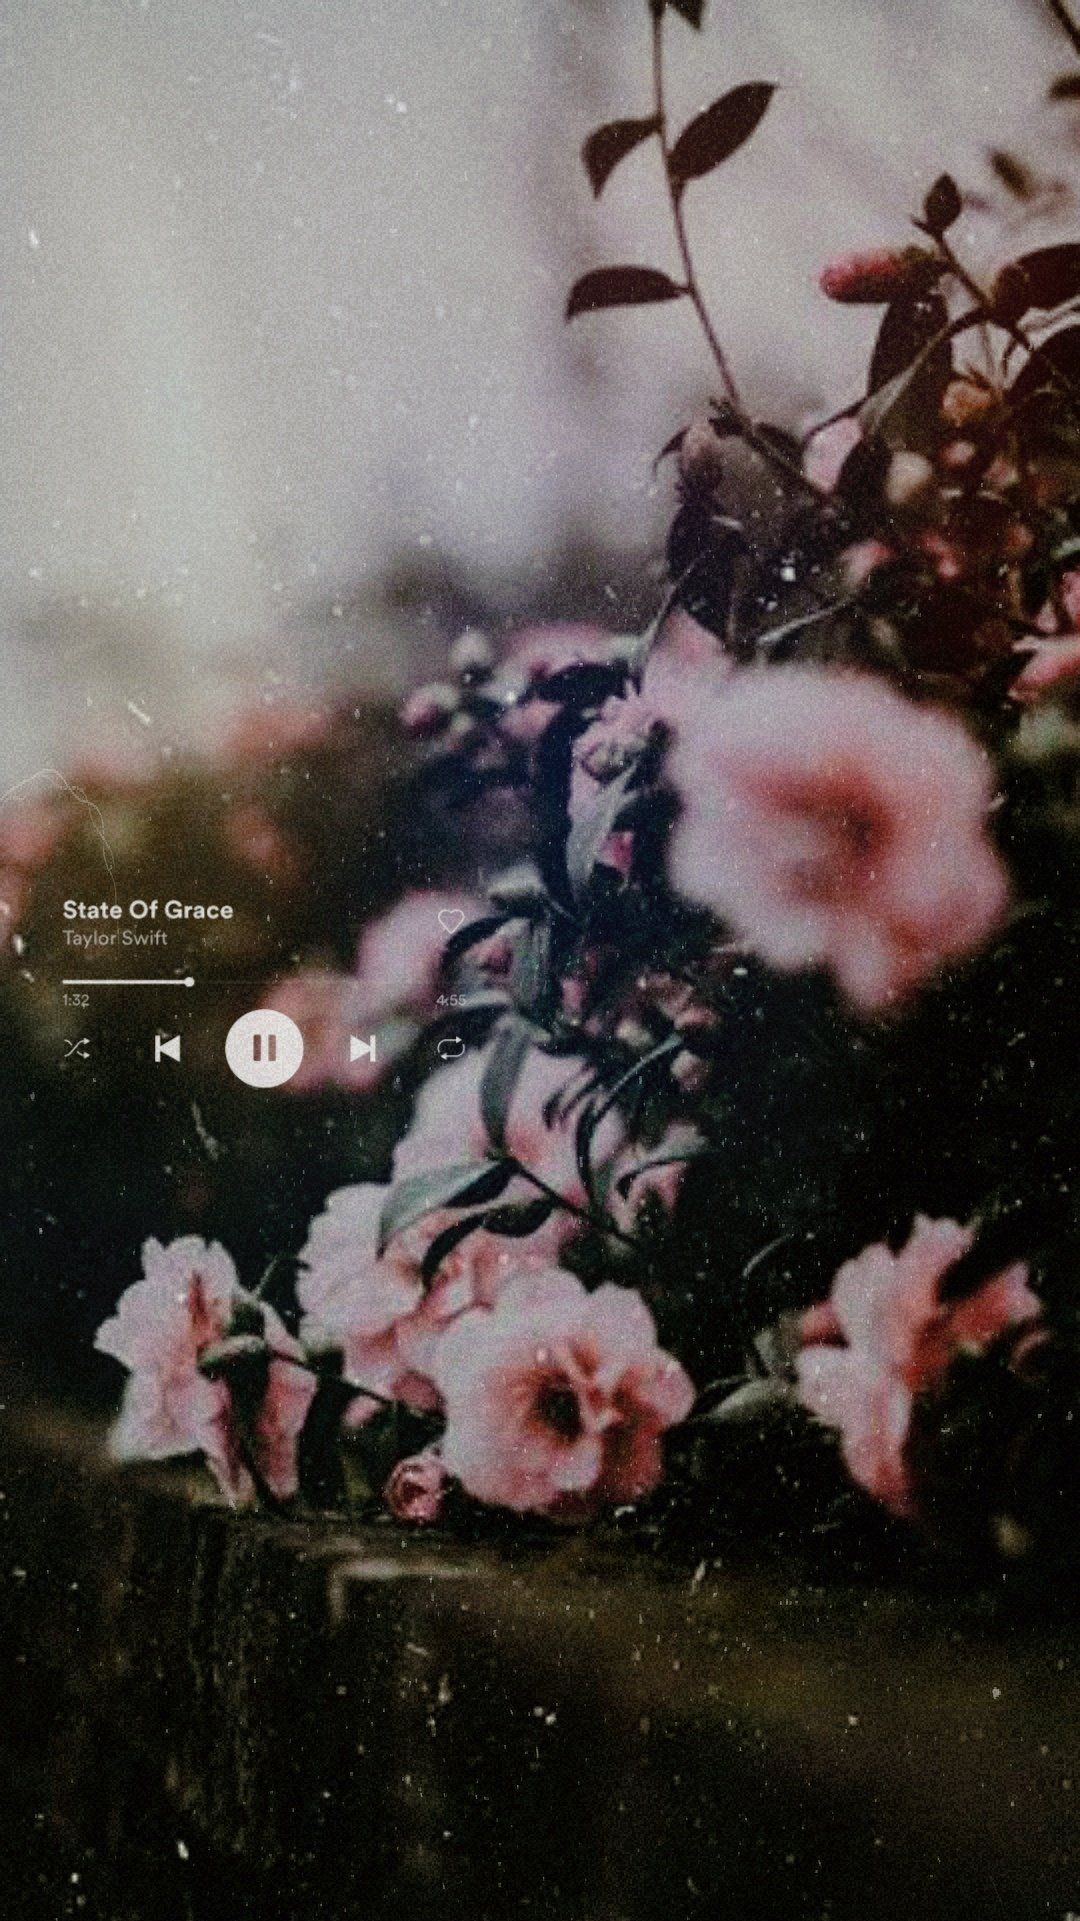 IPhone wallpaper with a pink flower bush and a Spotify player - Taylor Swift